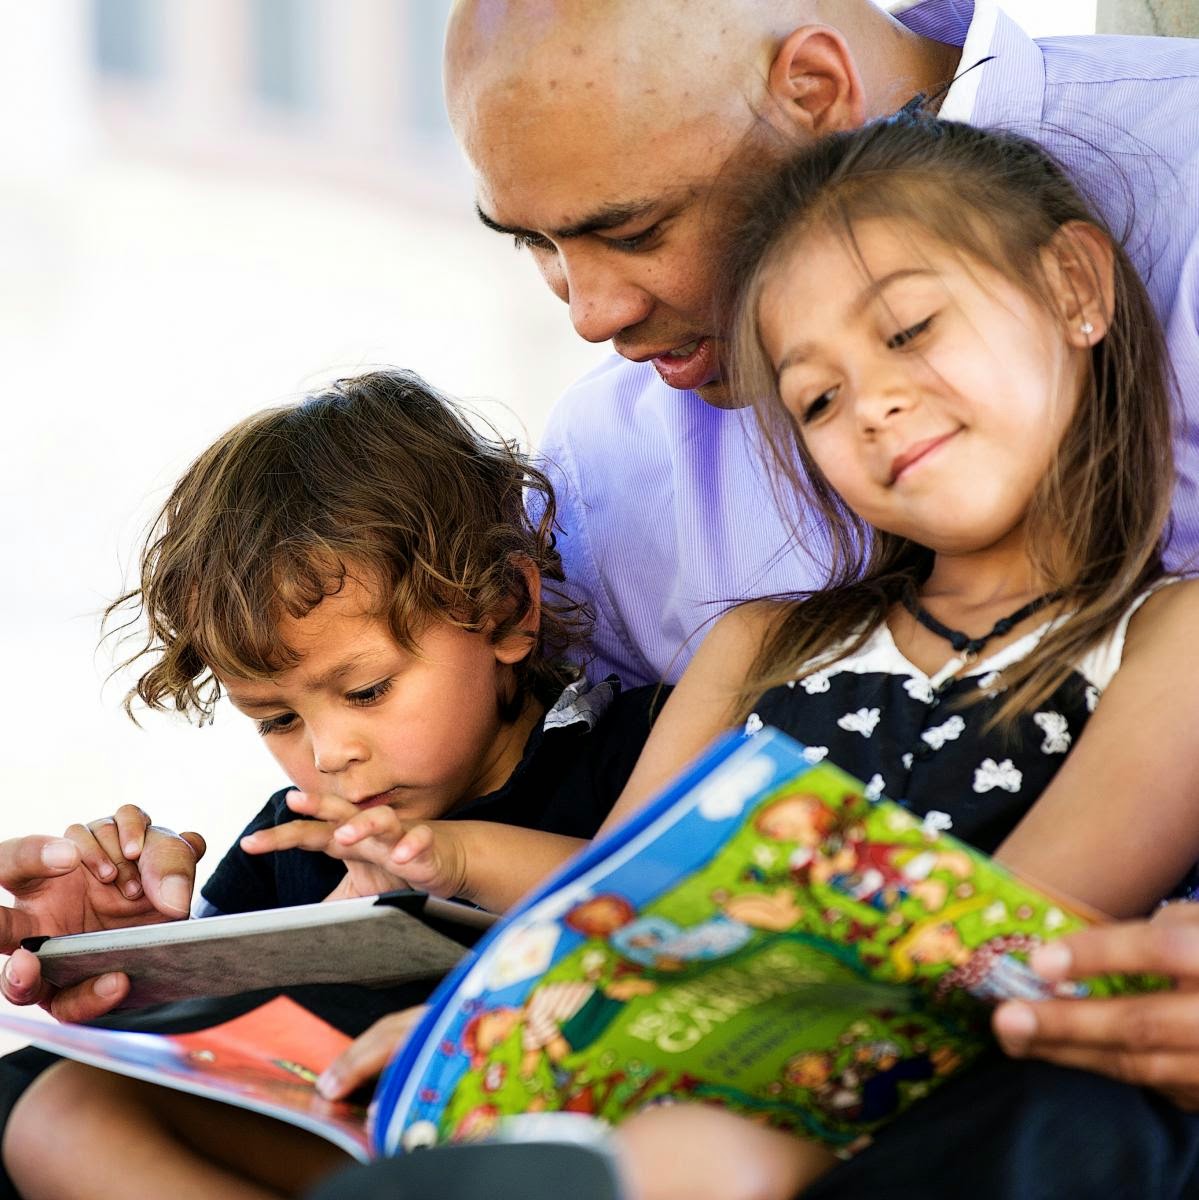 A man sits with two small children in his lap, each child holding an open book.